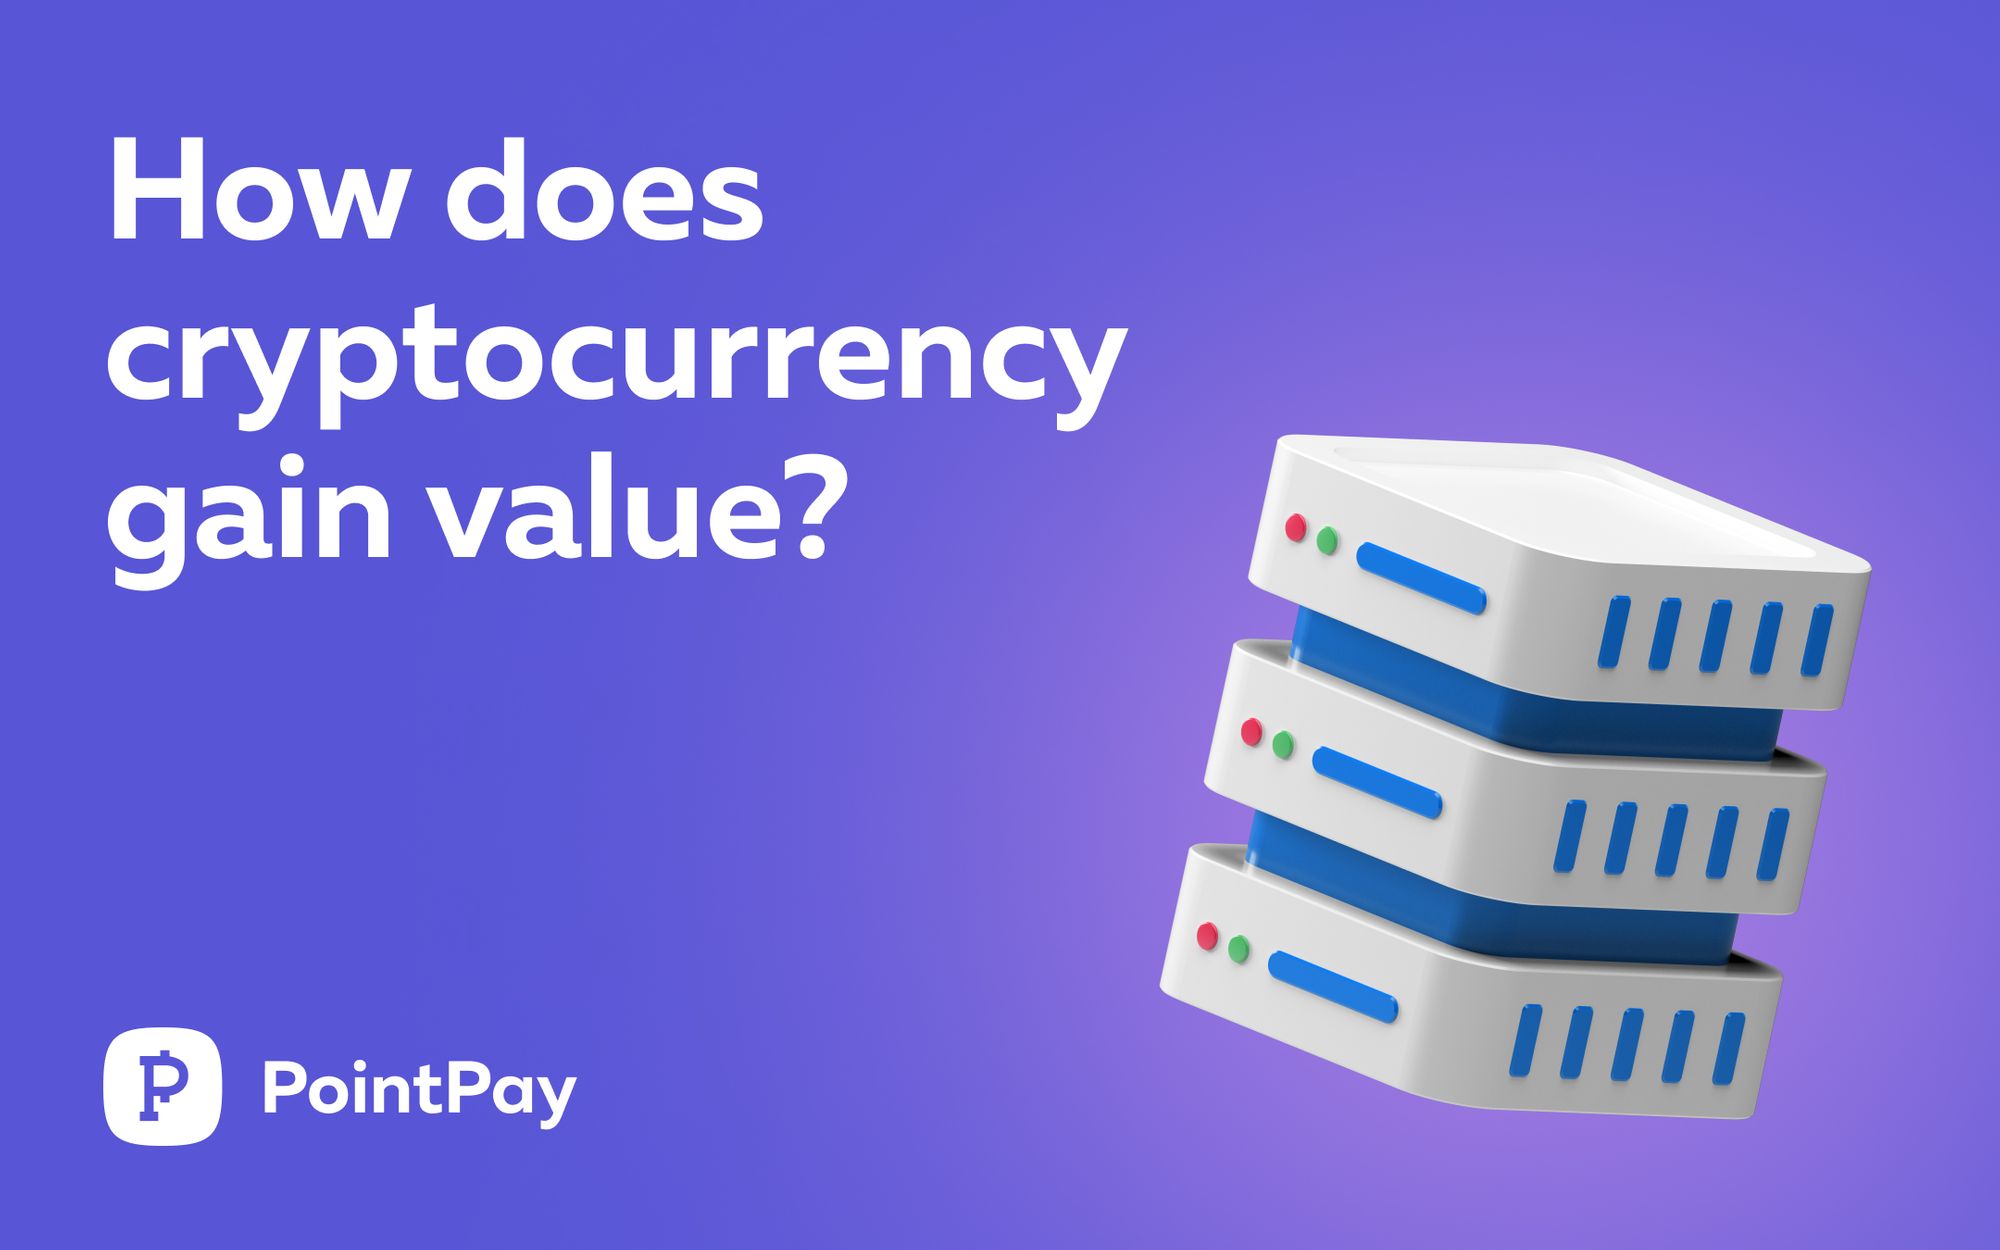 How does cryptocurrency gain value?